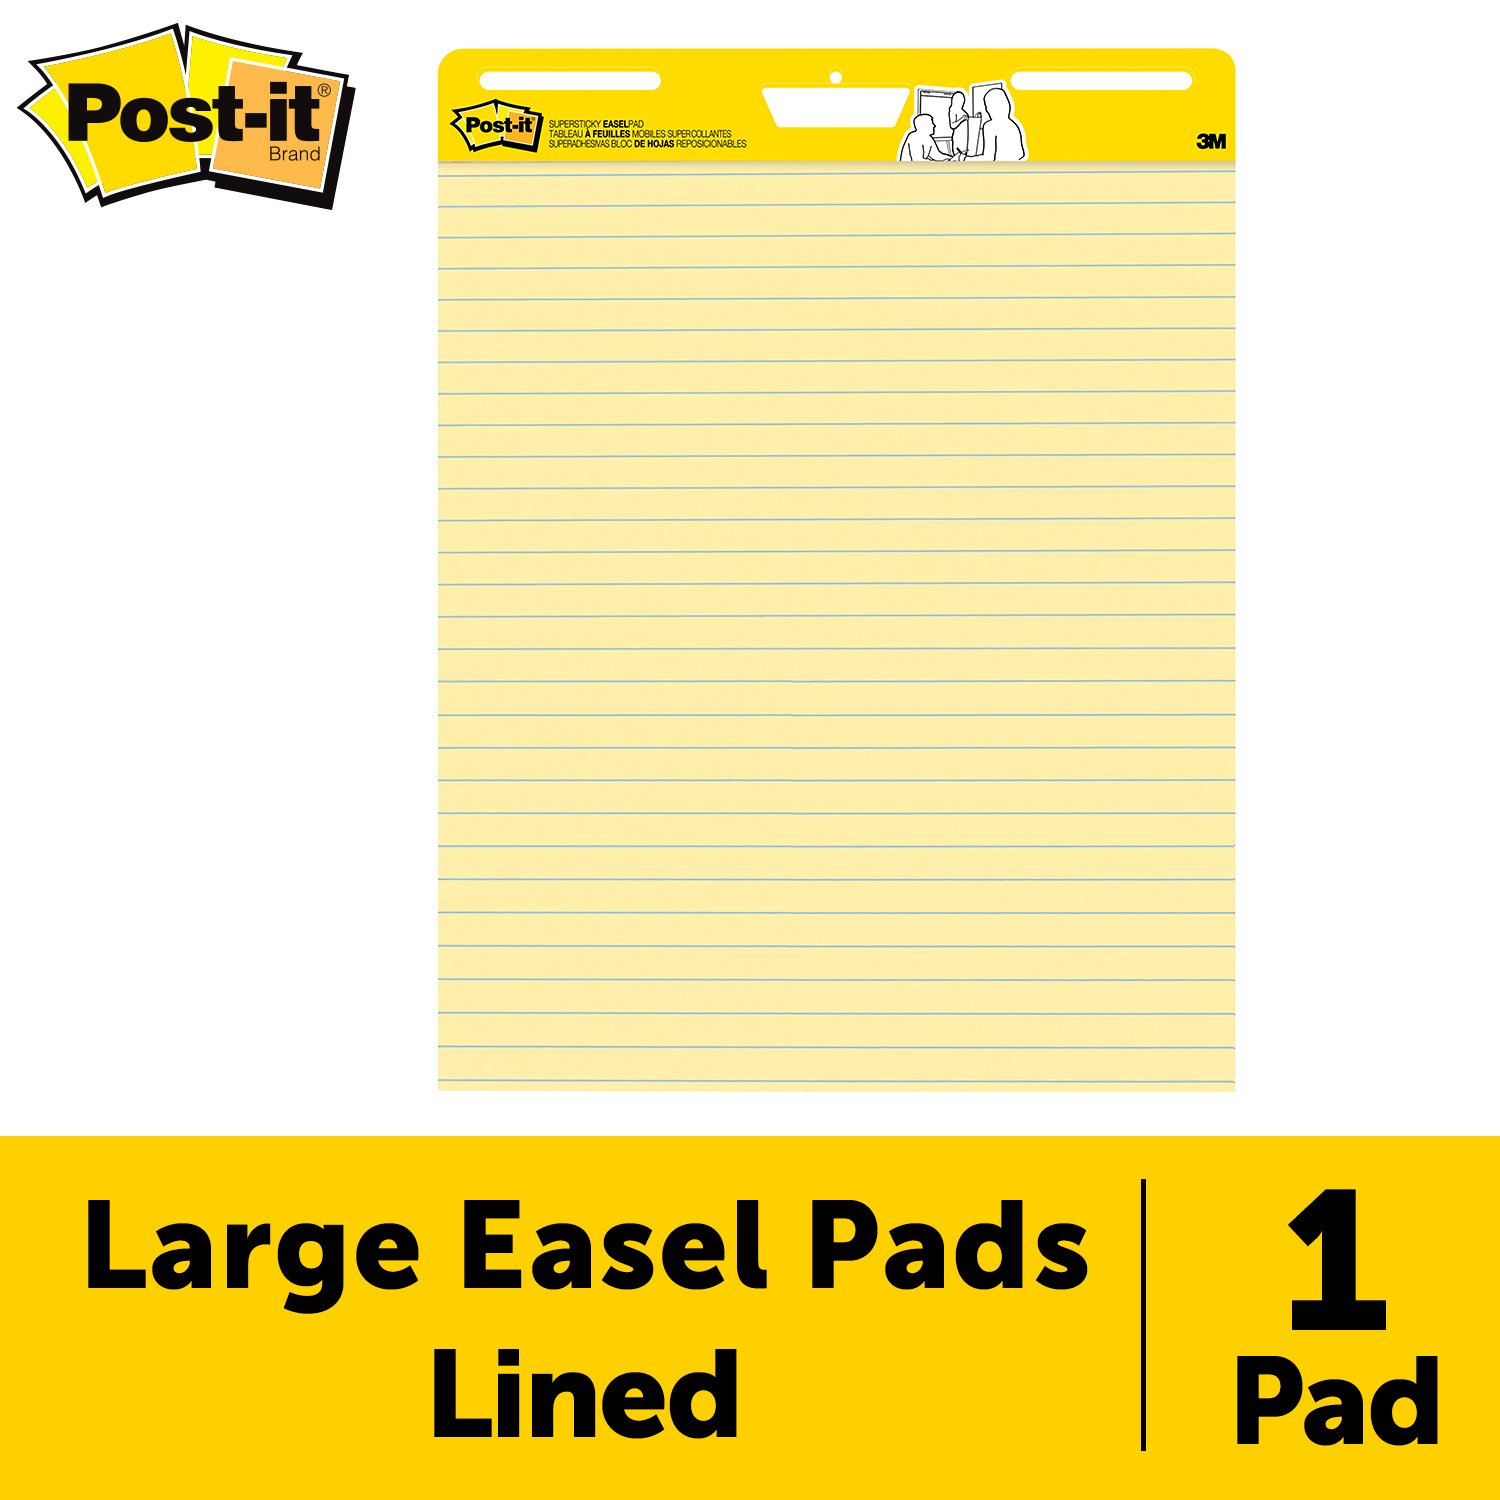 7010372192 - Post-it Super Sticky Easel Pad, 561SS 25 in. x 30 in.